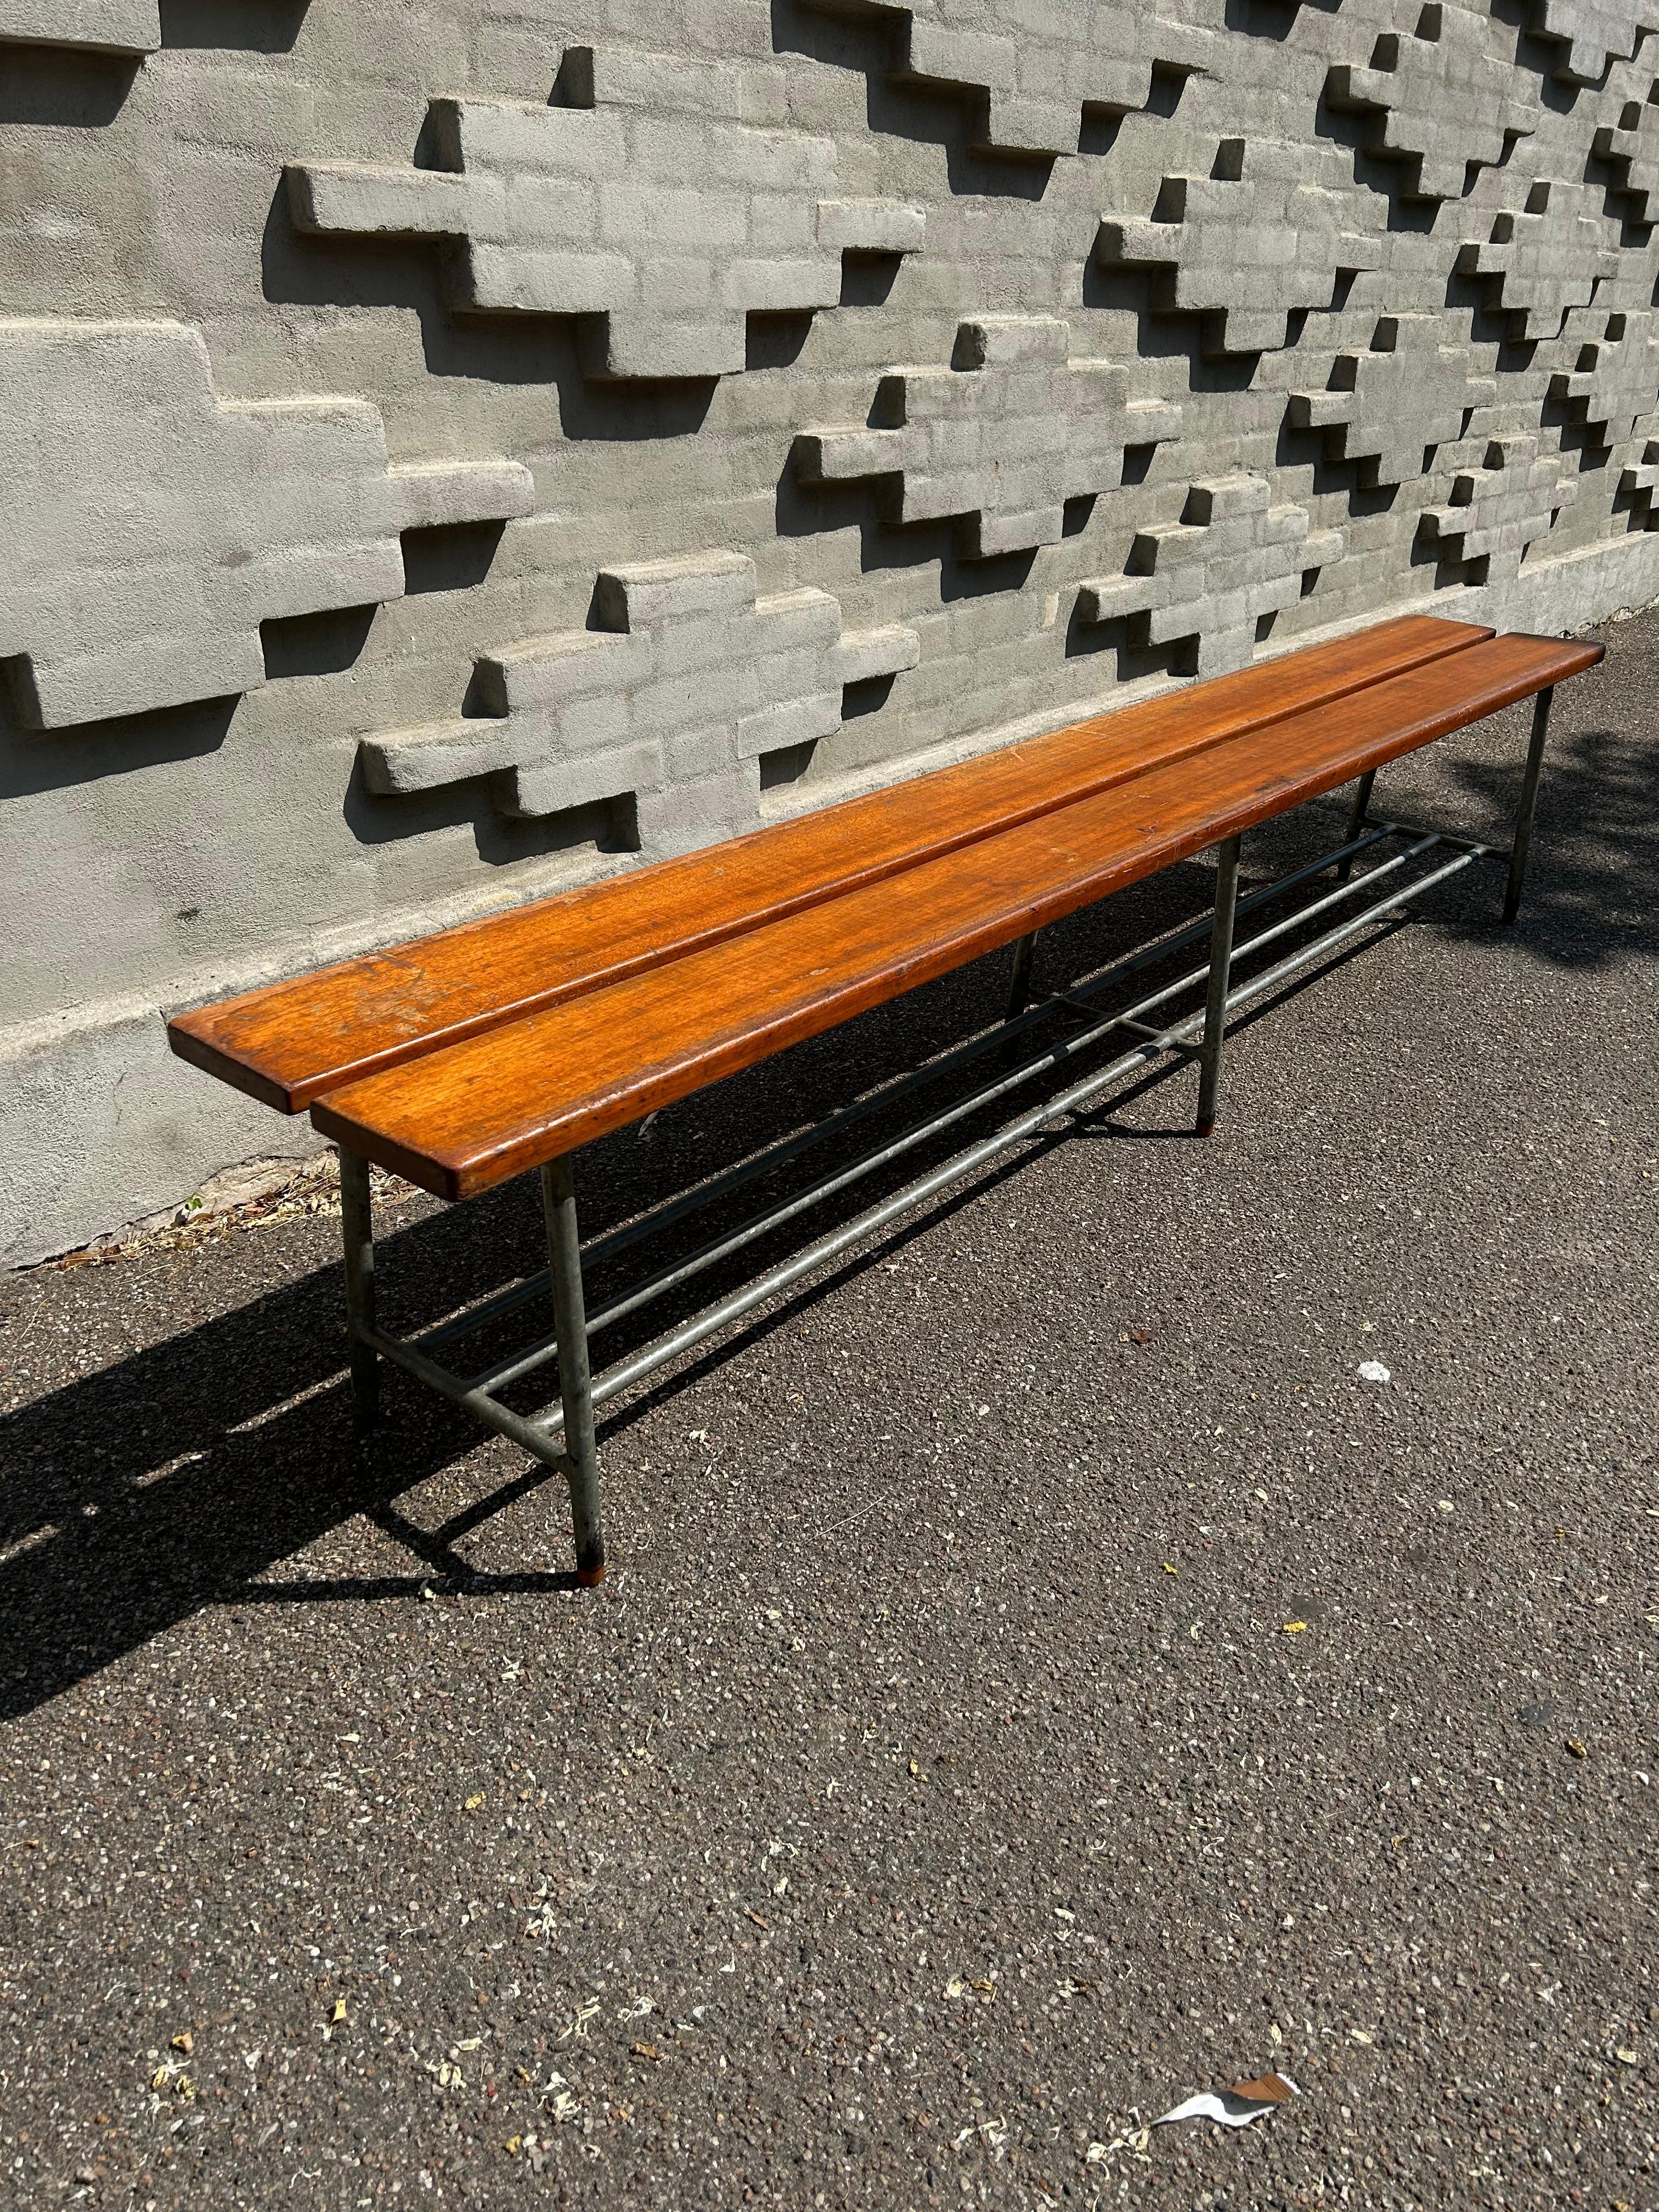 Rare and important bench in steel and teak made on commission for Mørkhøj Skole by Danish architect Vilhelm Lauritzen in the 1960s.

The bench has a base made of steel tubes with teak shoes and a top of two pieces of solid teak.

Vilhelm Theodor